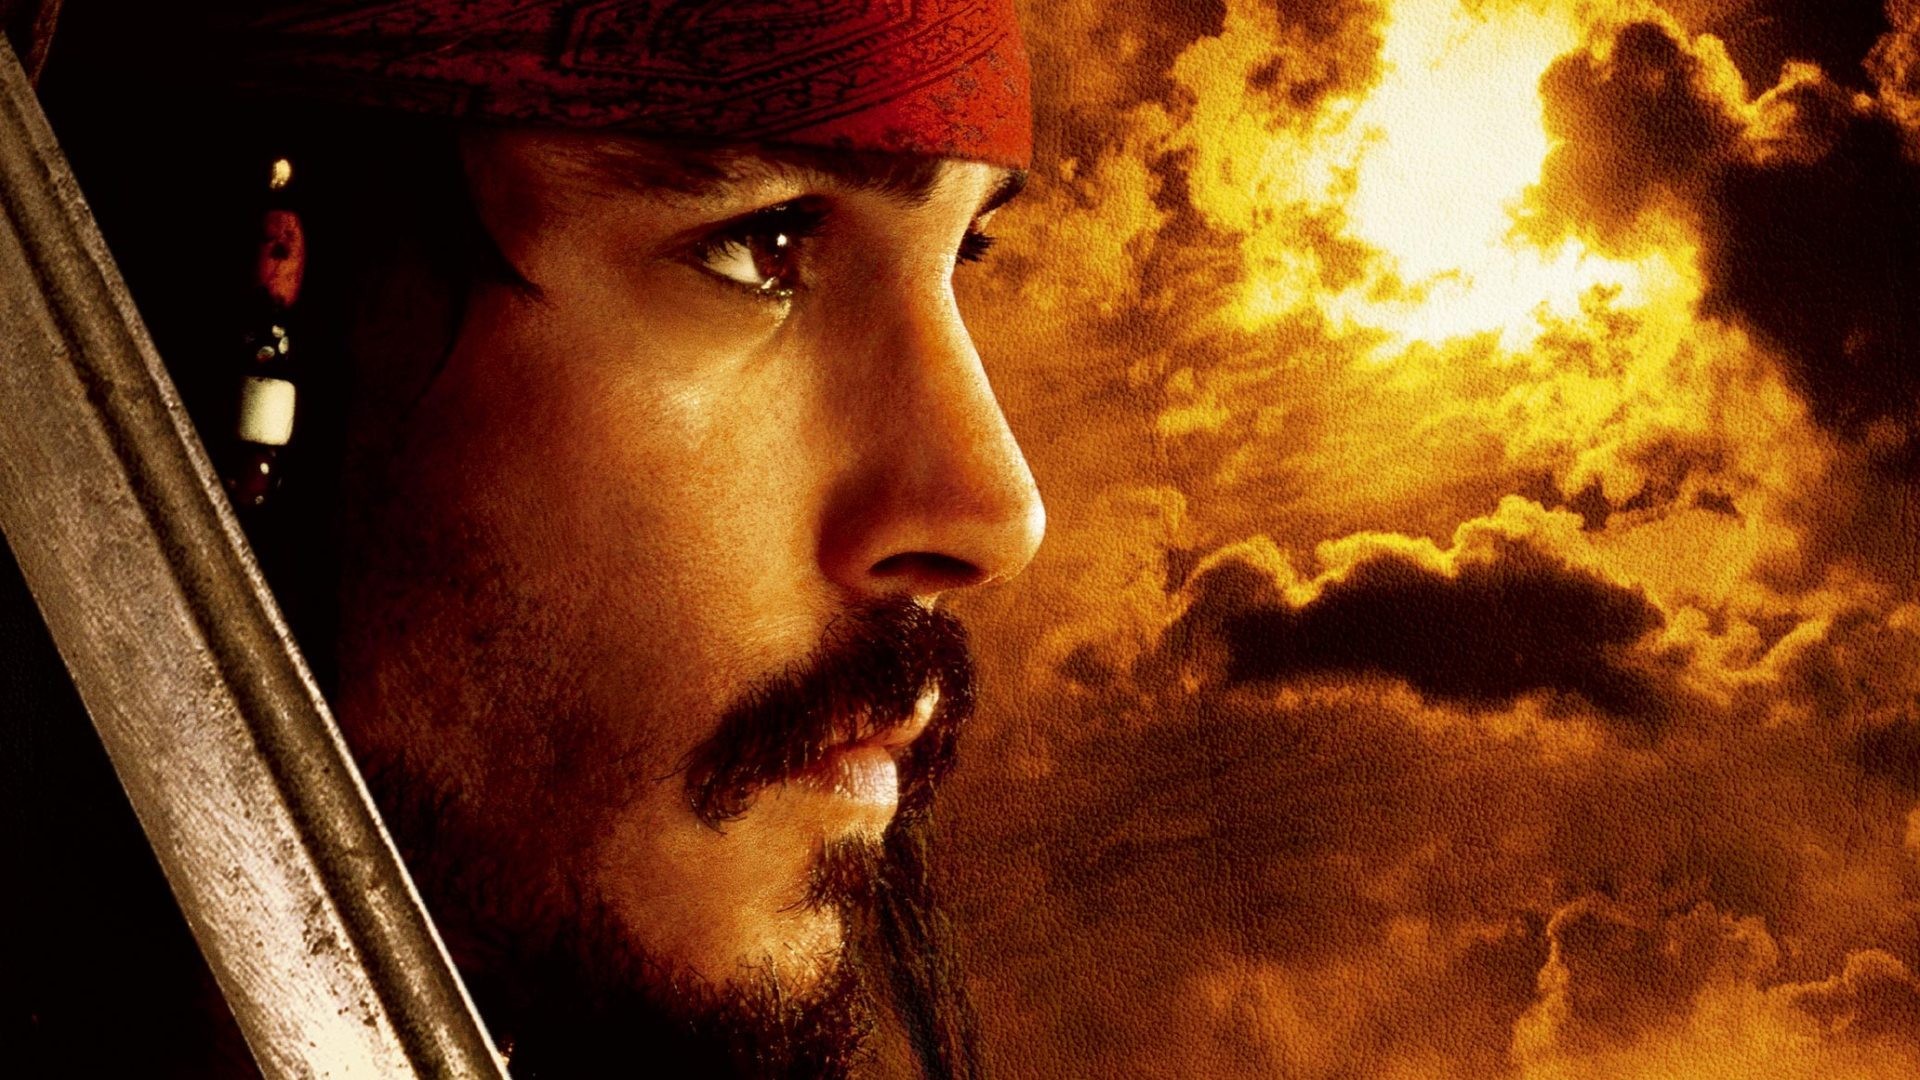 Popular Pirates Of The Caribbean: The Curse Of The Black Pearl Image for Phone